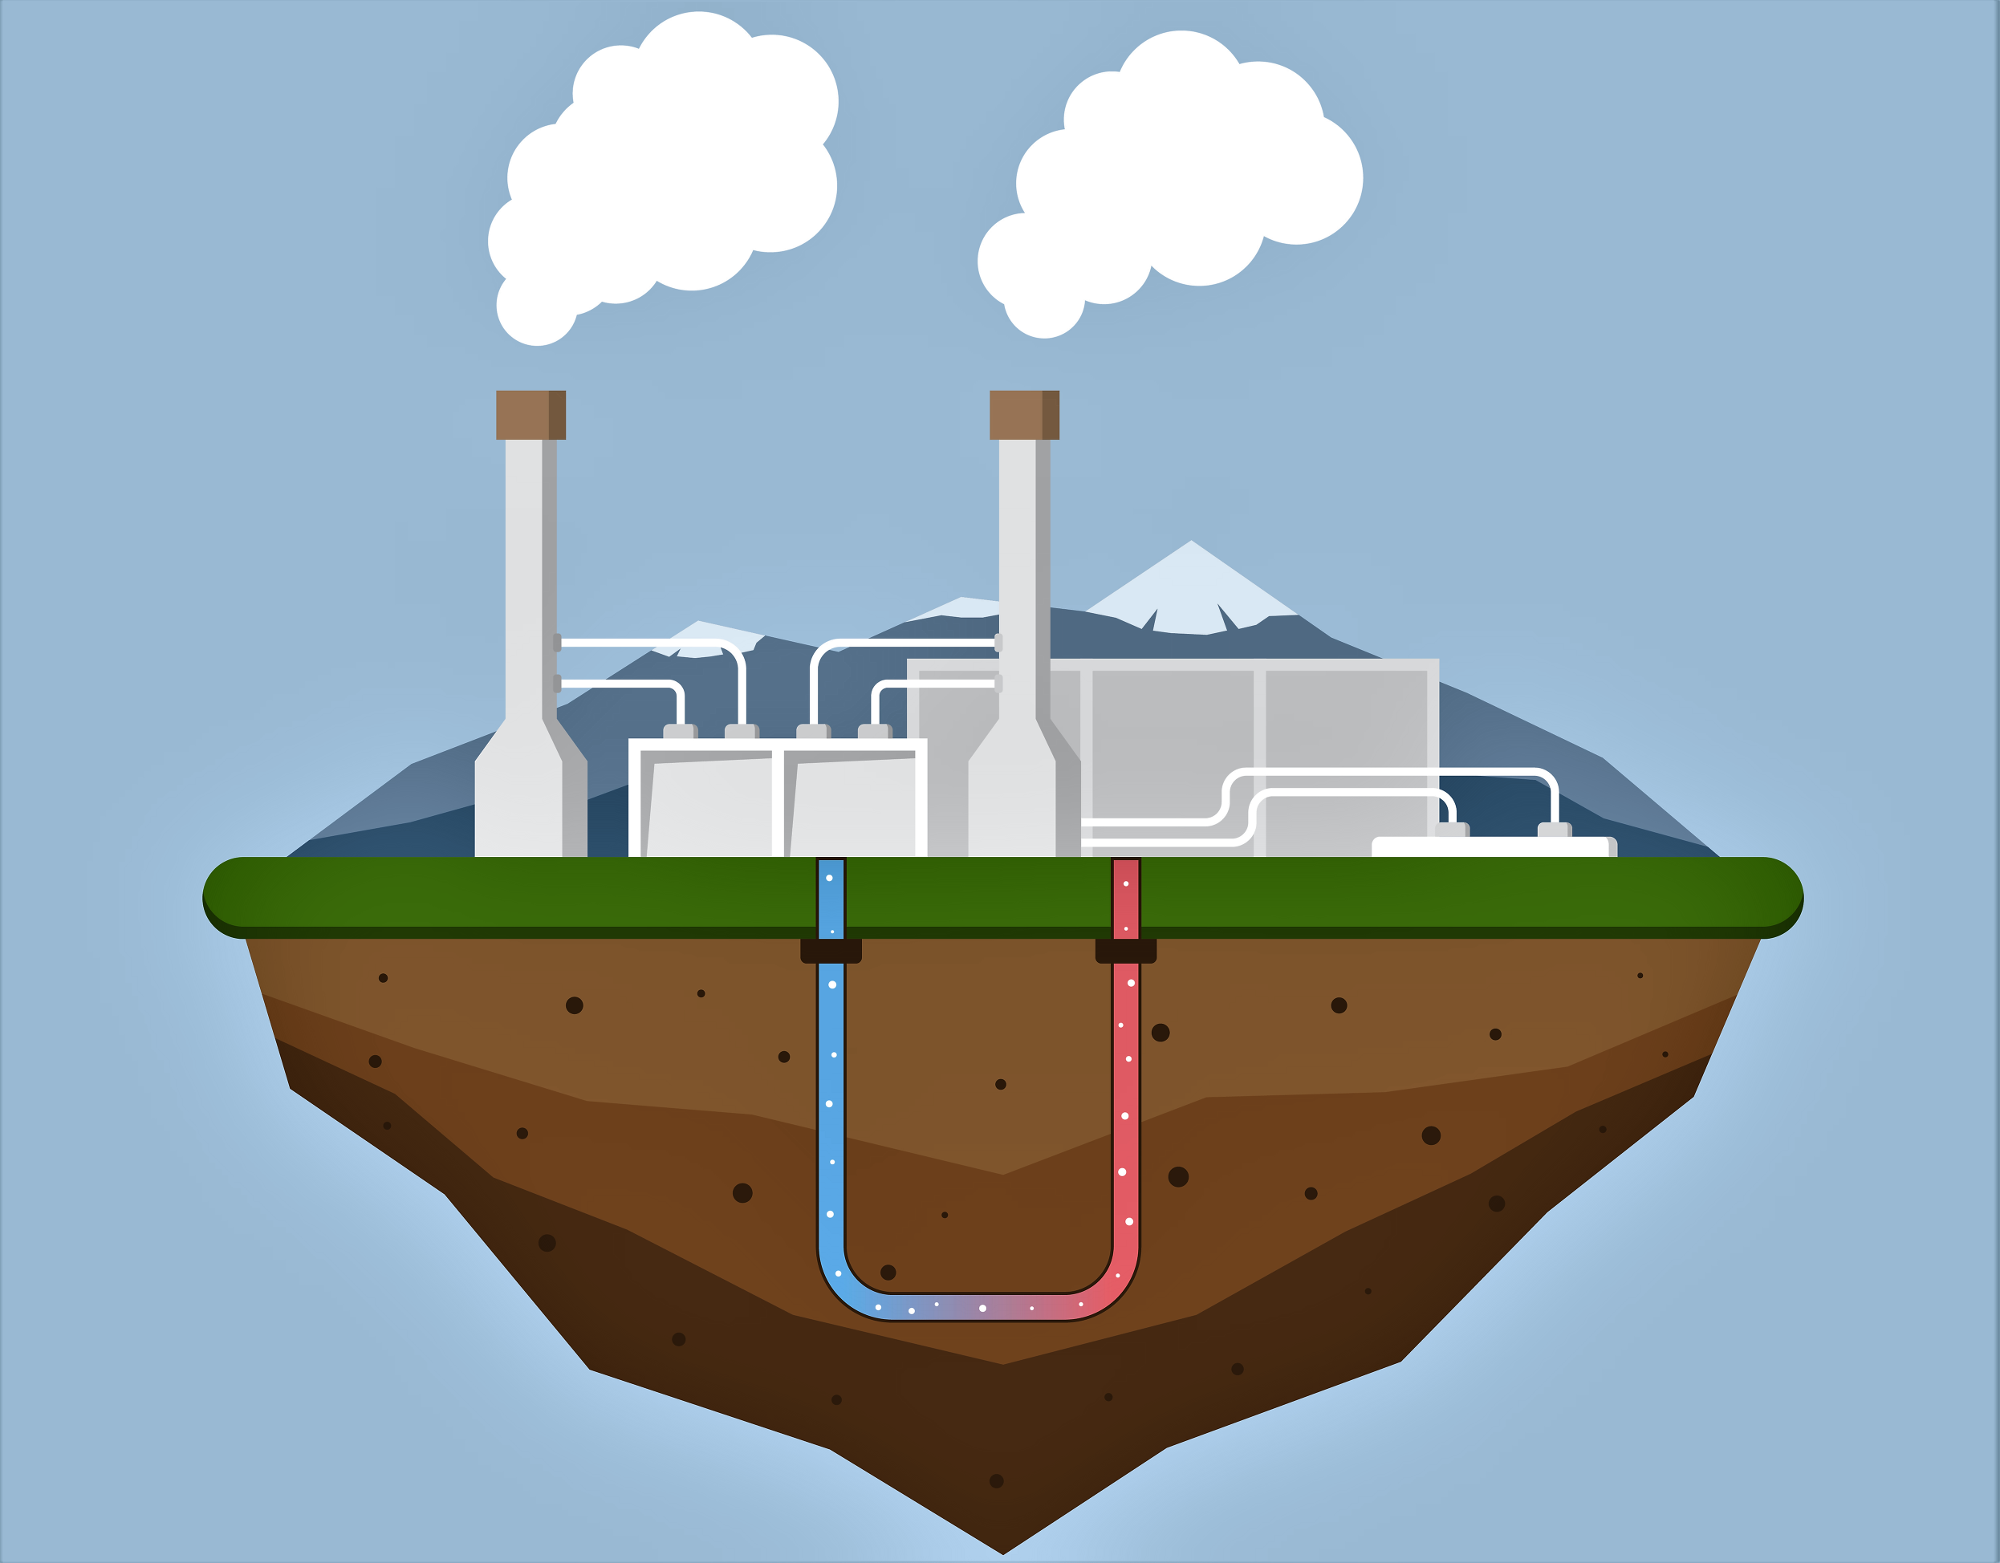 Stokke, Unge Venstre |  Geothermal energy - the ideal energy for Norway?